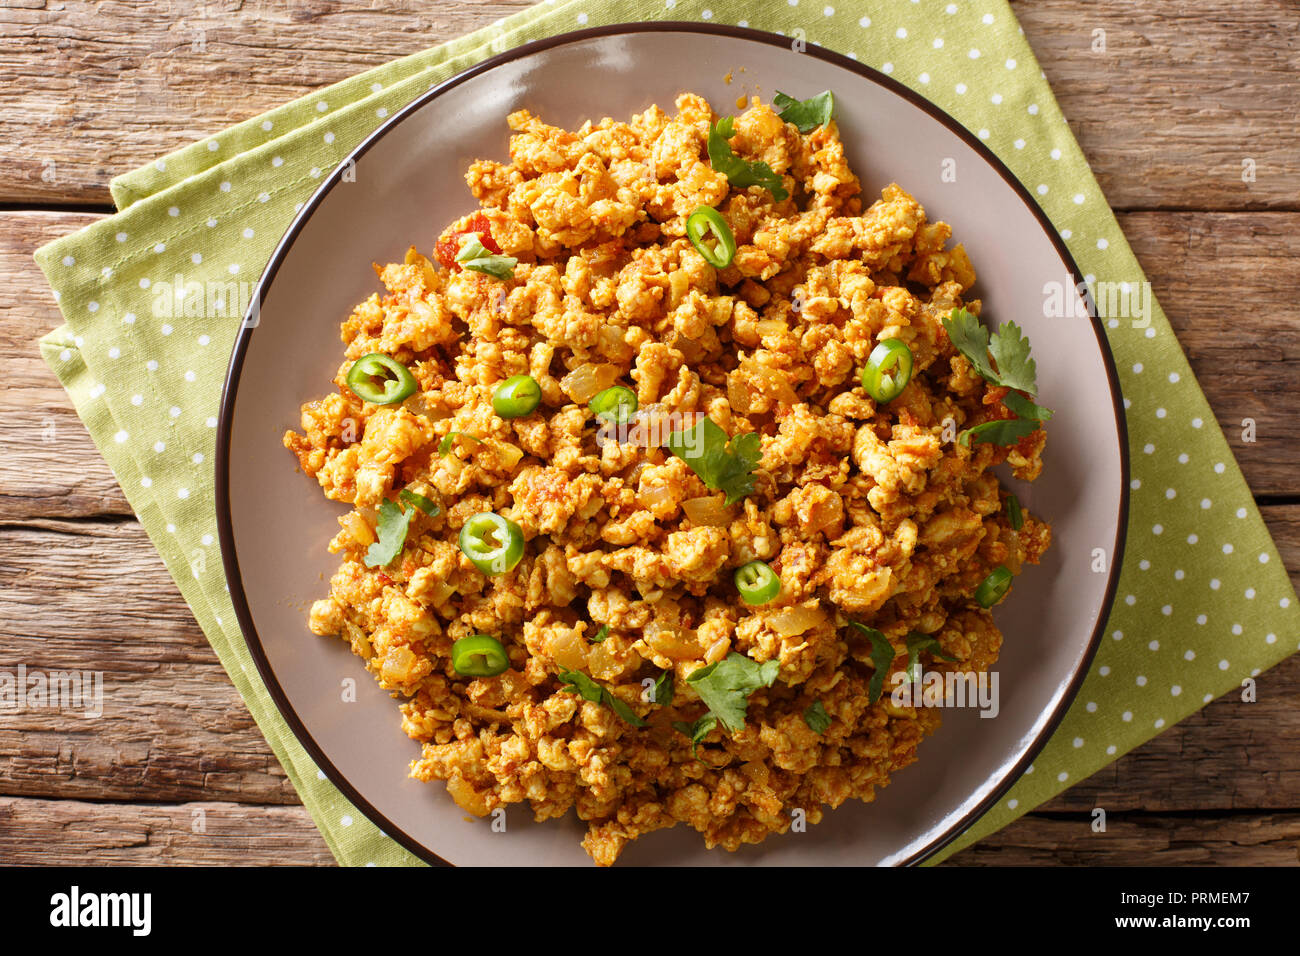 https://c8.alamy.com/comp/PRMEM7/indian-dish-chicken-keema-with-onions-tomatoes-spices-and-minced-meat-closeup-on-a-plate-horizontal-top-view-from-above-PRMEM7.jpg